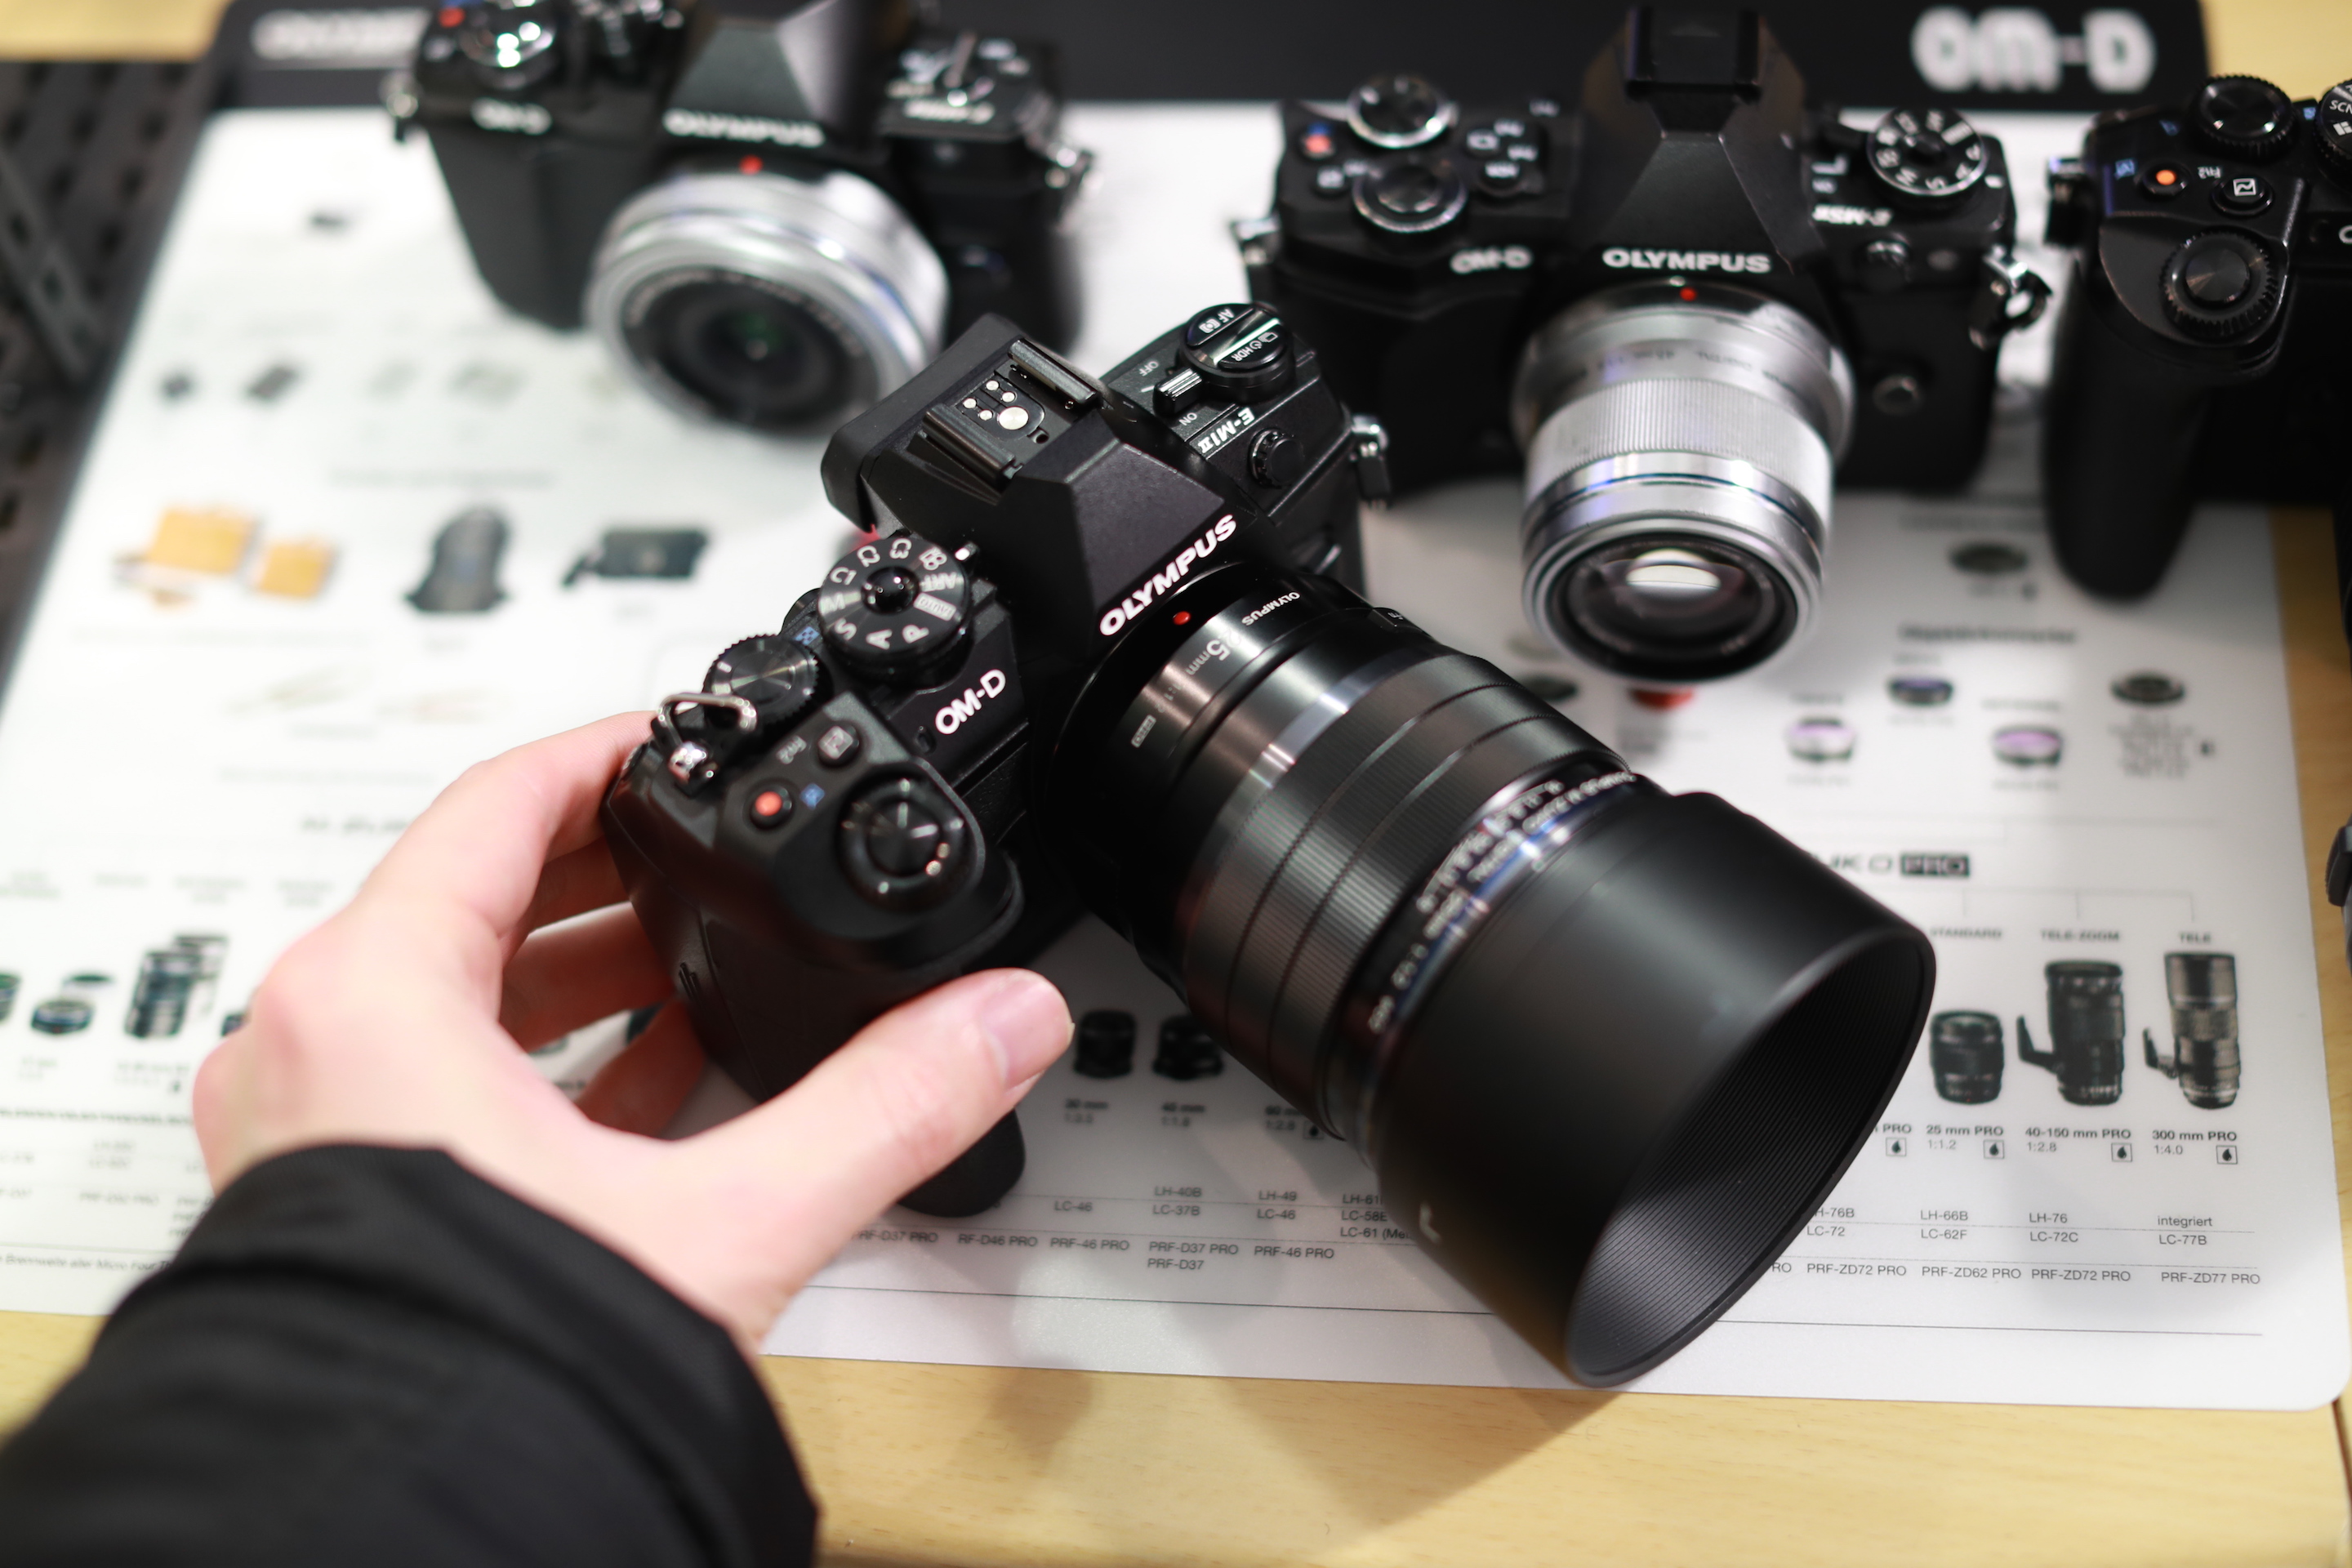 visueel Mammoet Temerity Olympus E-M1 II mini-review - a sign of things to come with the Panasonic  GH5? - EOSHD.com - Filmmaking Gear and Camera Reviews